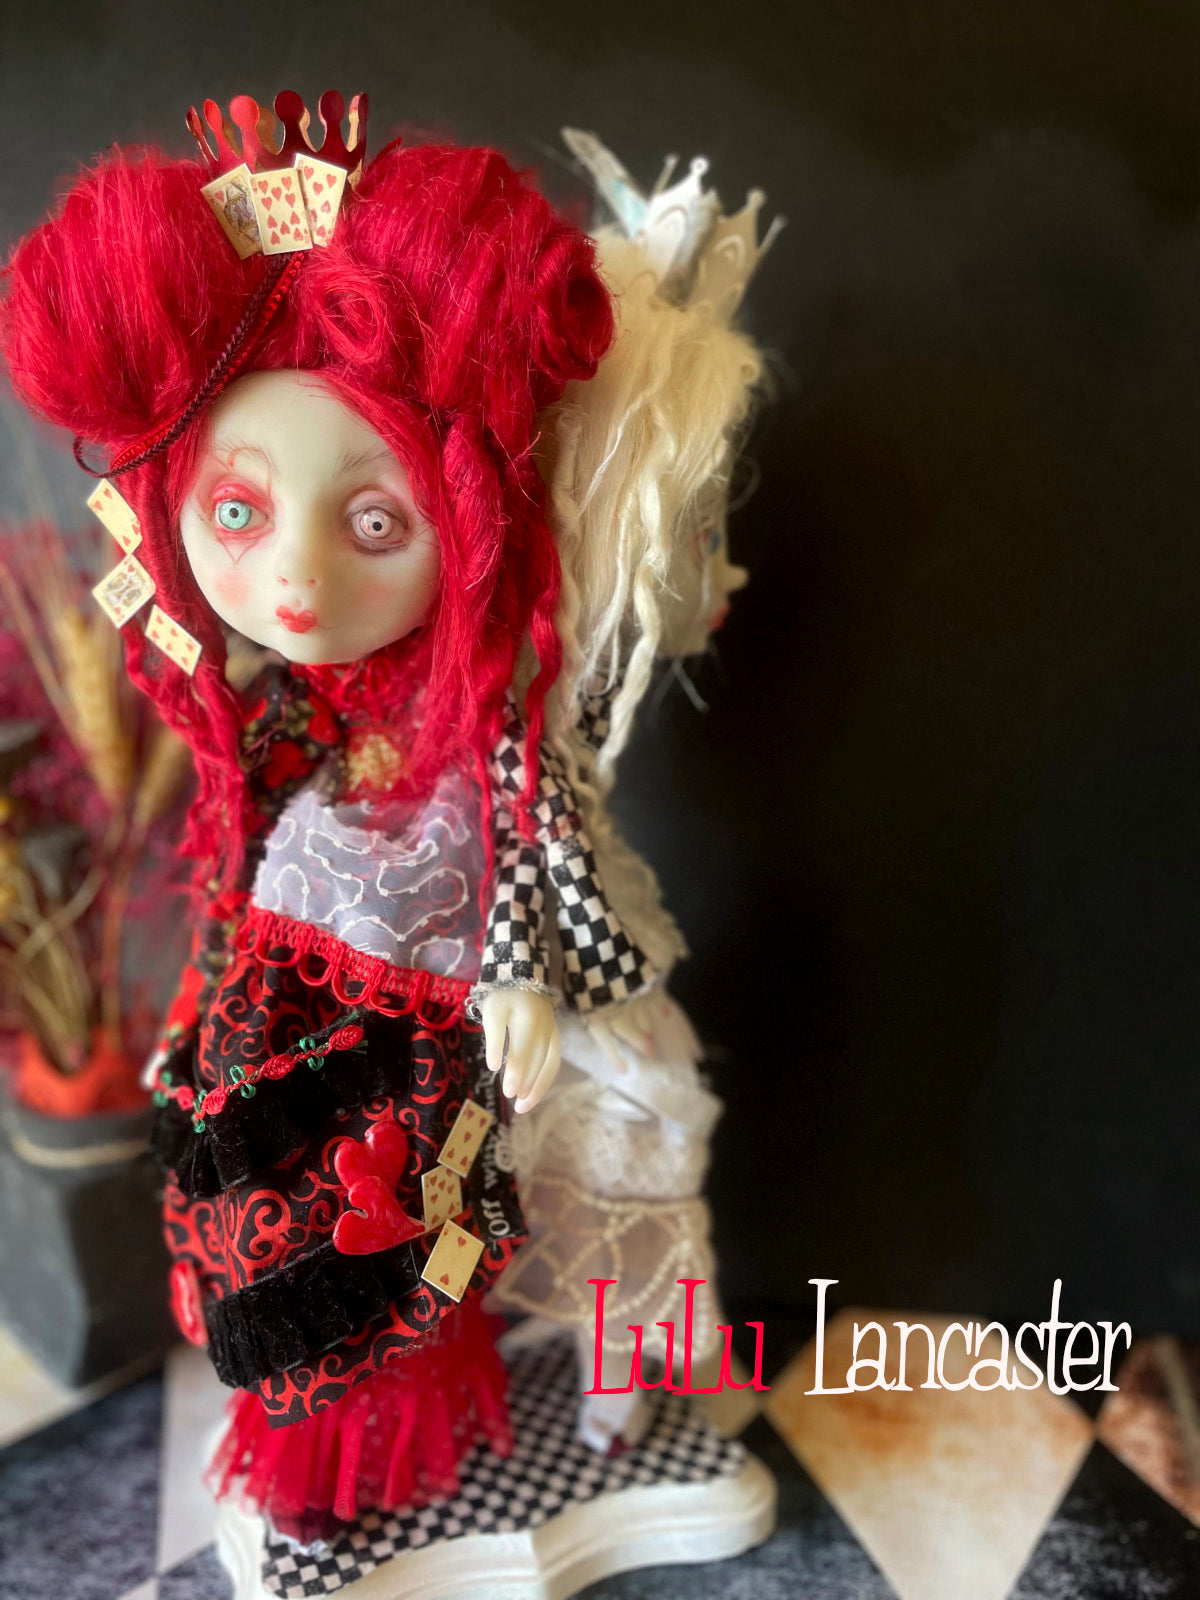 Conjoined Red and White Queens of Wonderland Original LuLu Lancaster Art Doll